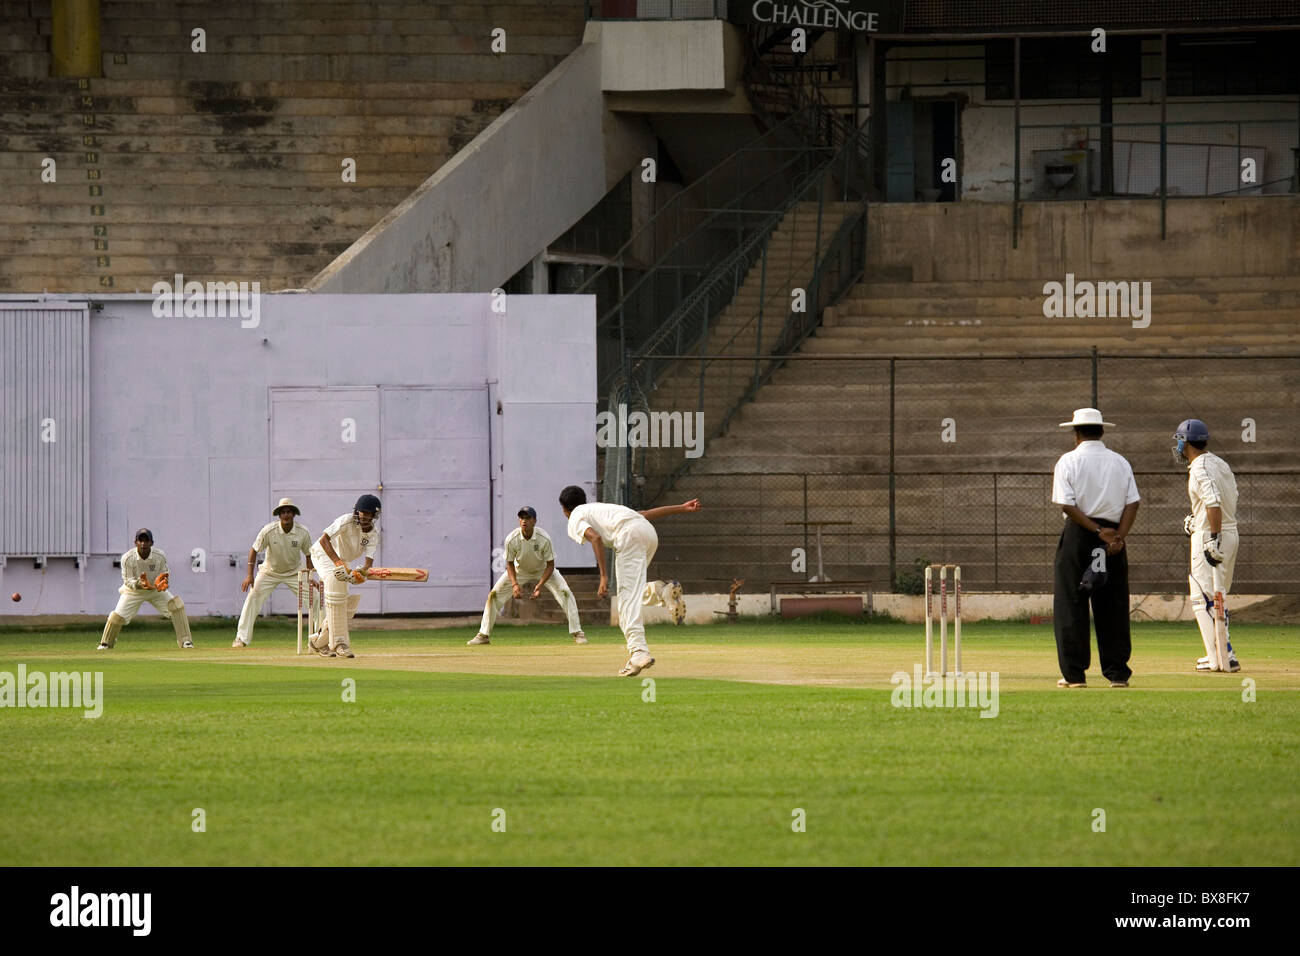 Talented Indian cricketers play in the Zonal tournament at the National Cricket Academy in Bengaluru, India. Stock Photo